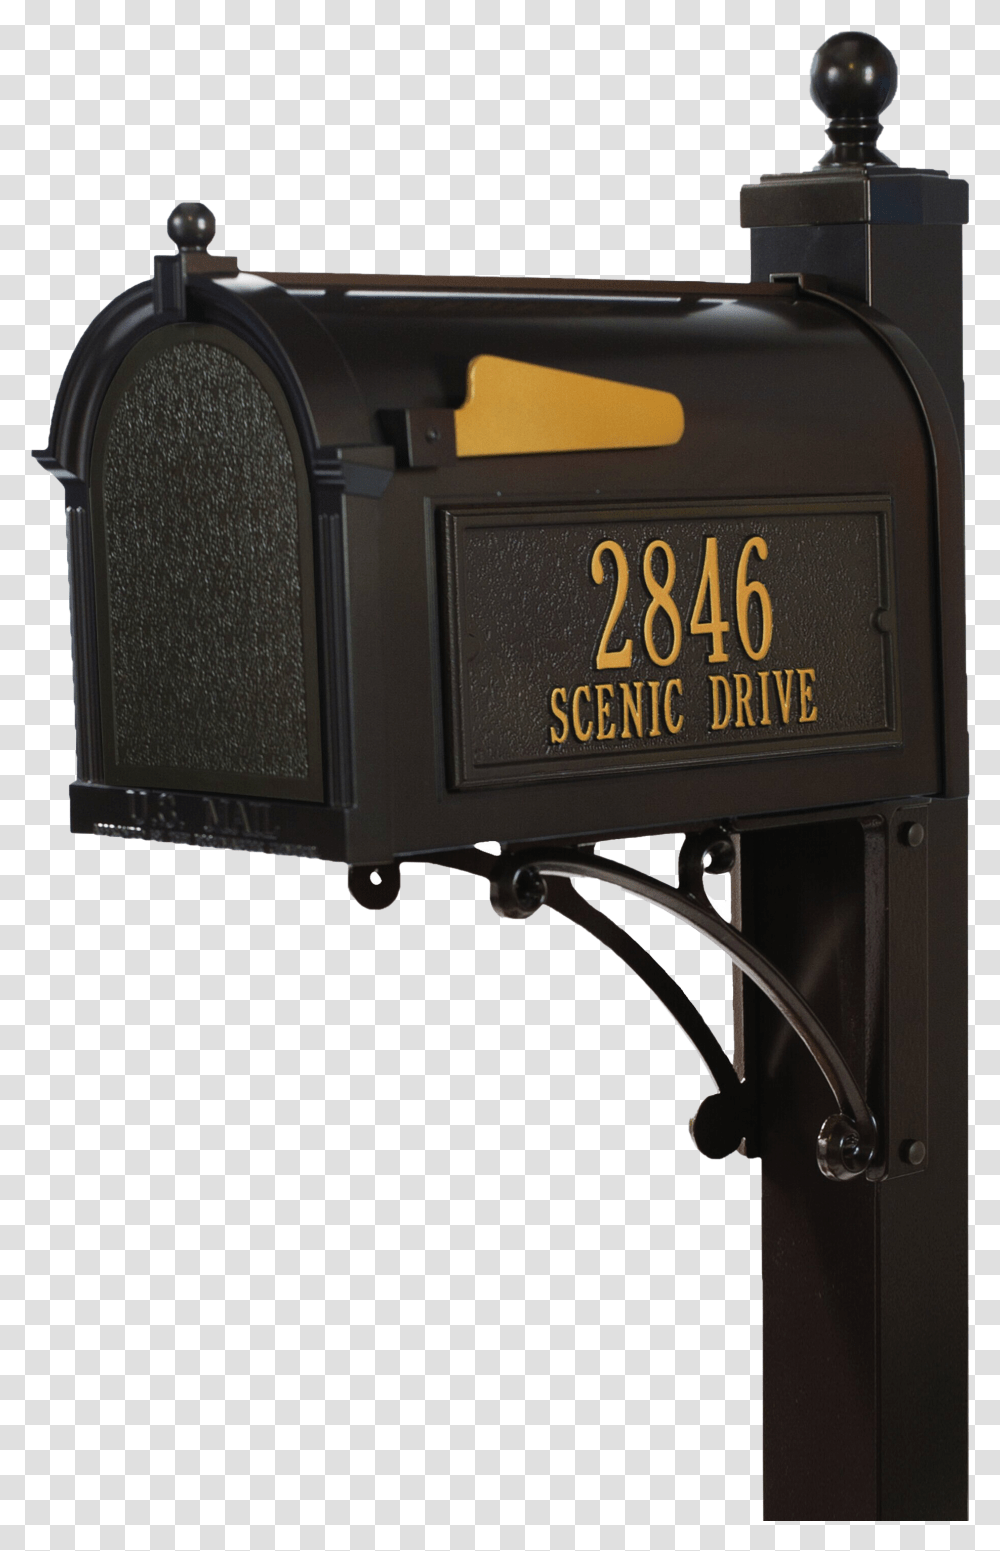 Mailbox Download Free Whitehall Mailbox, Letterbox, Camera, Electronics, Postbox Transparent Png